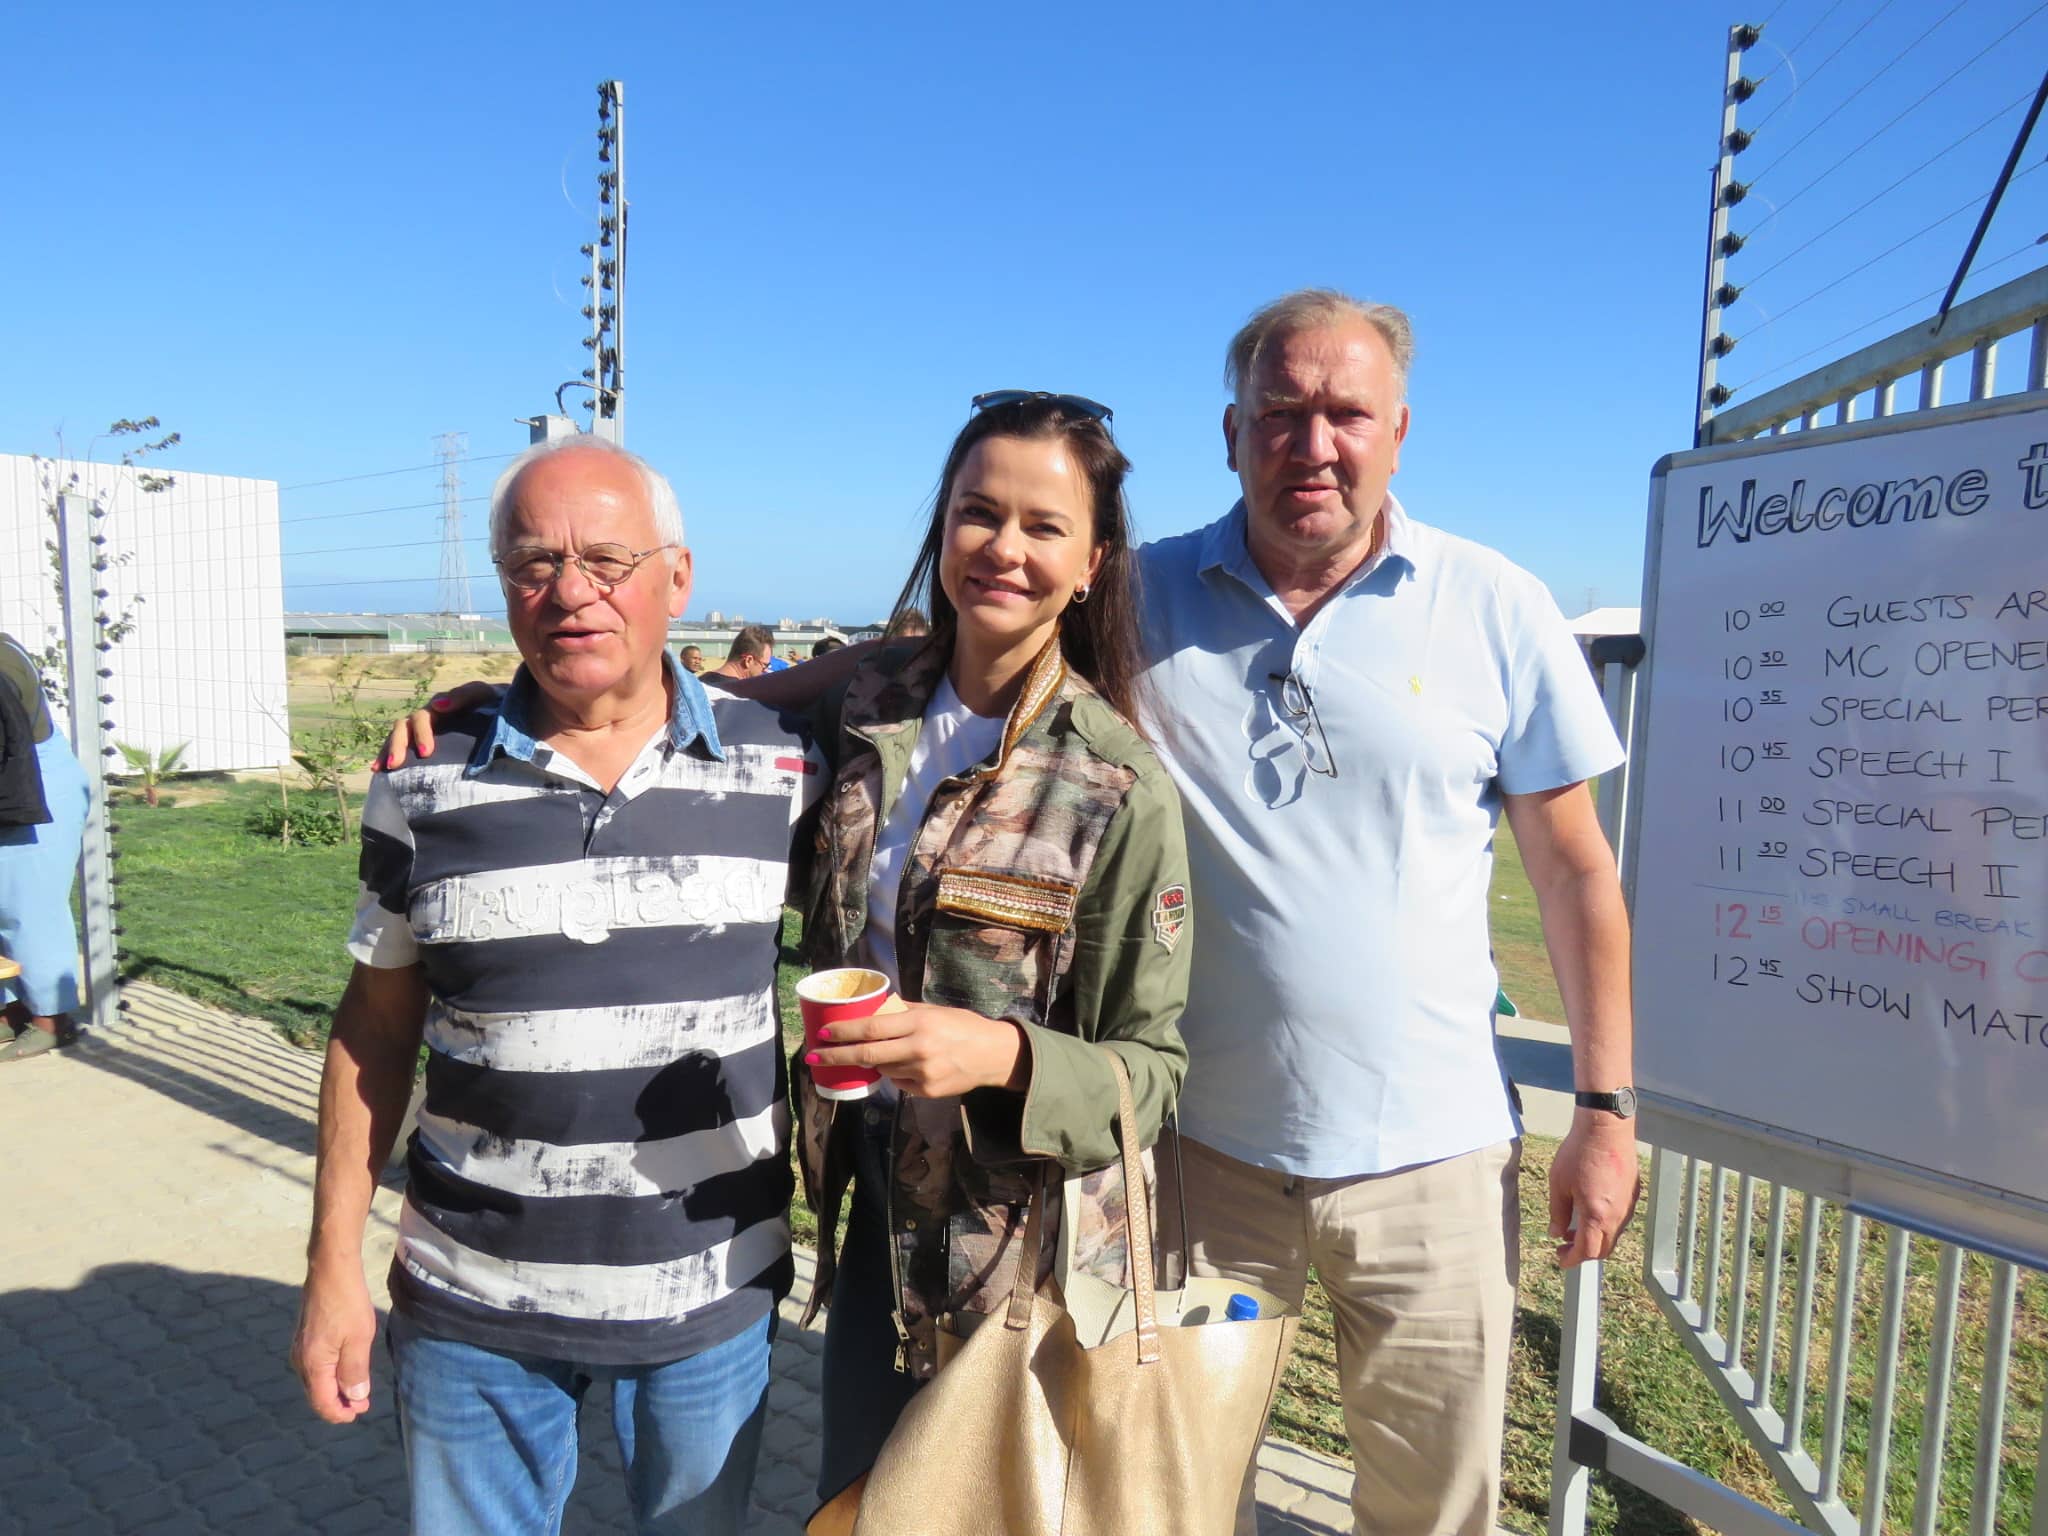 Three visitors of the Young Bafana Arena opening in South Africa standing next to the event timetable.